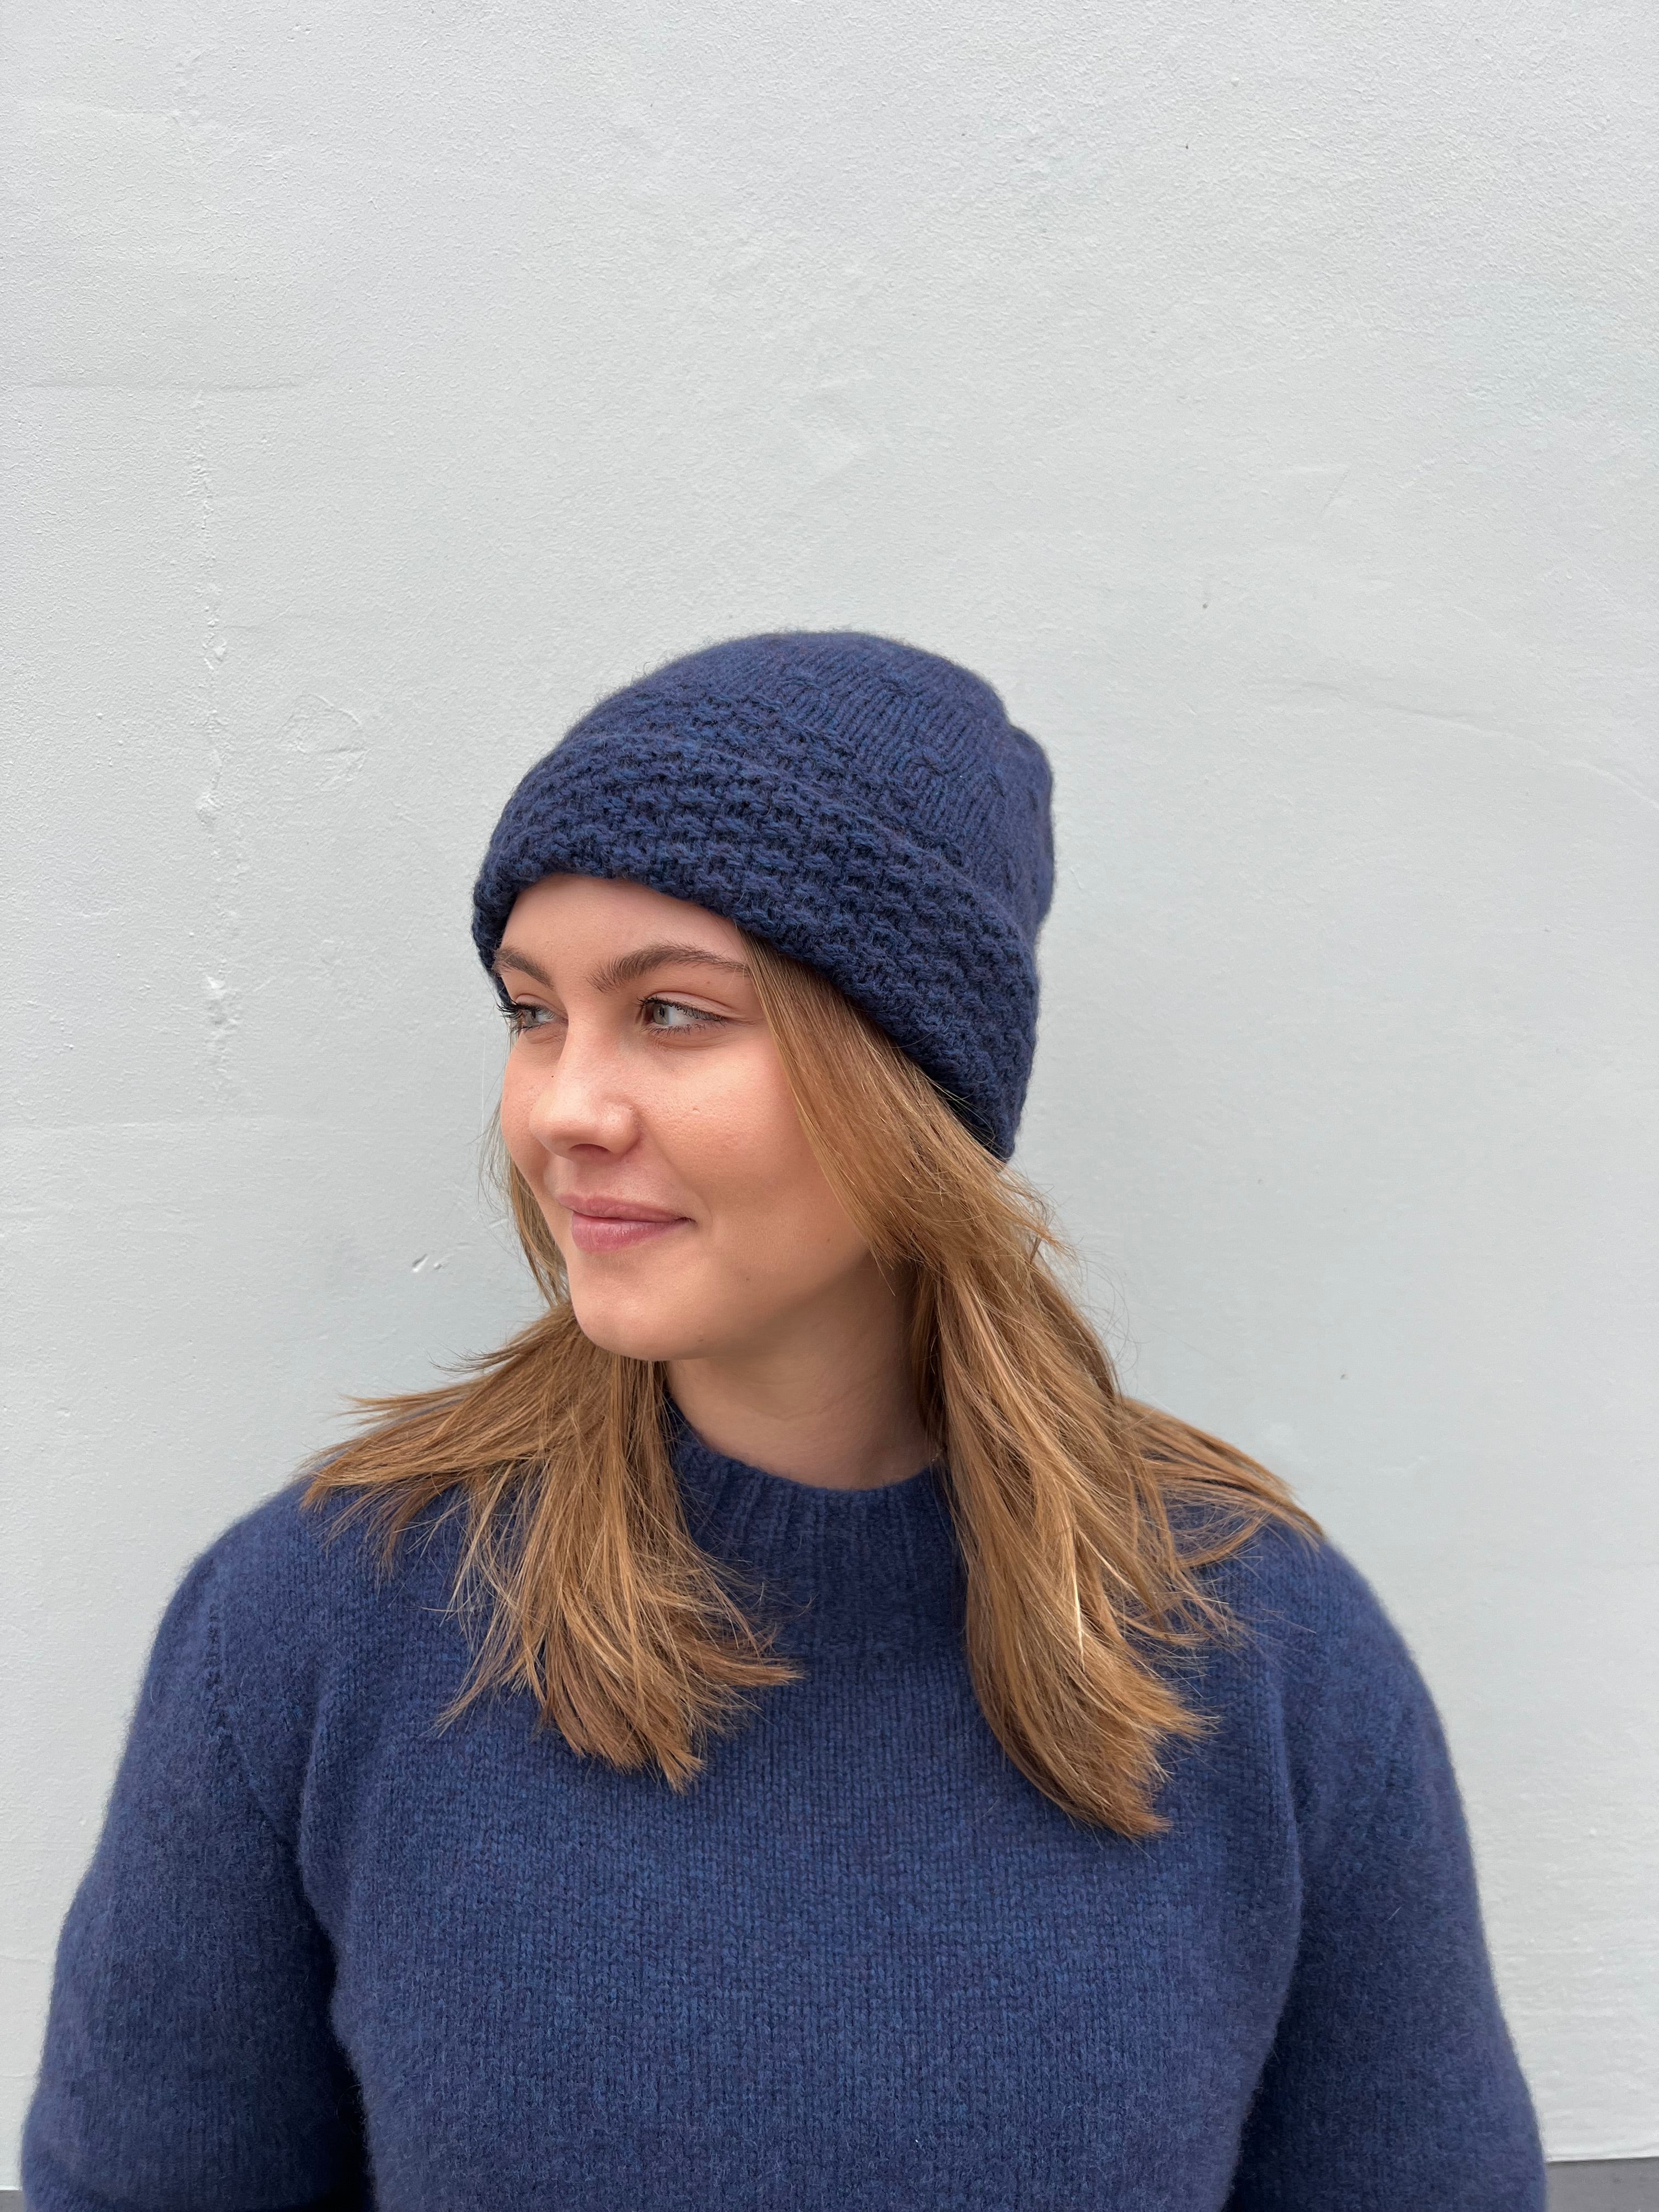 Hetre Alresford Hampshire Accessory Store English Weather Ocean Moss Beanie